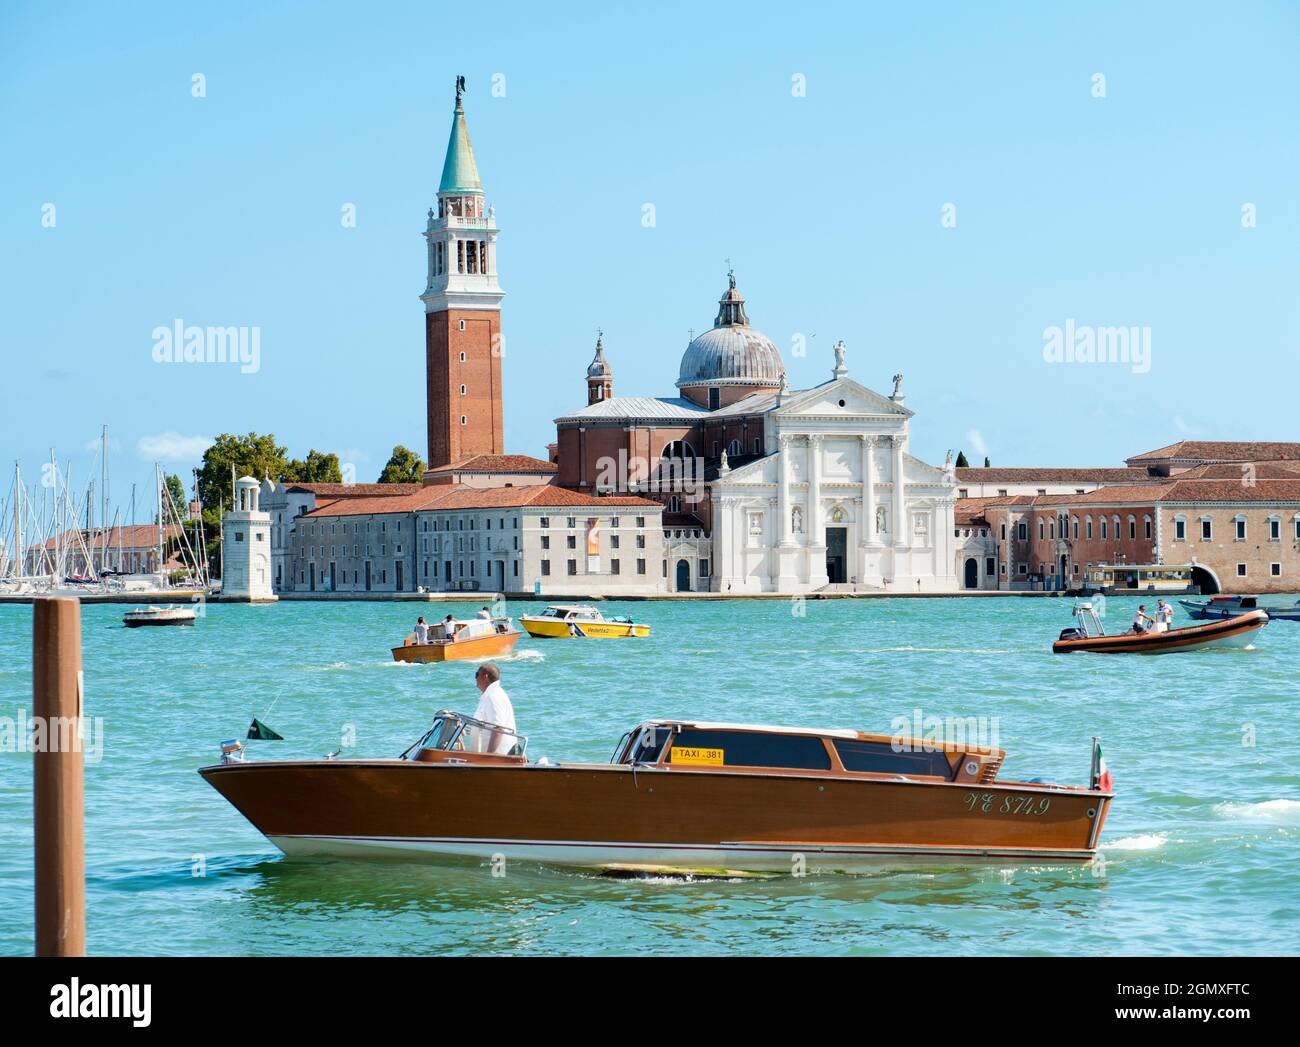 Venice, Italy - 5 September 2017; several people on boats are in-shot. Venice is one of the great cities of the world, famed for its canals, sublime a Stock Photo